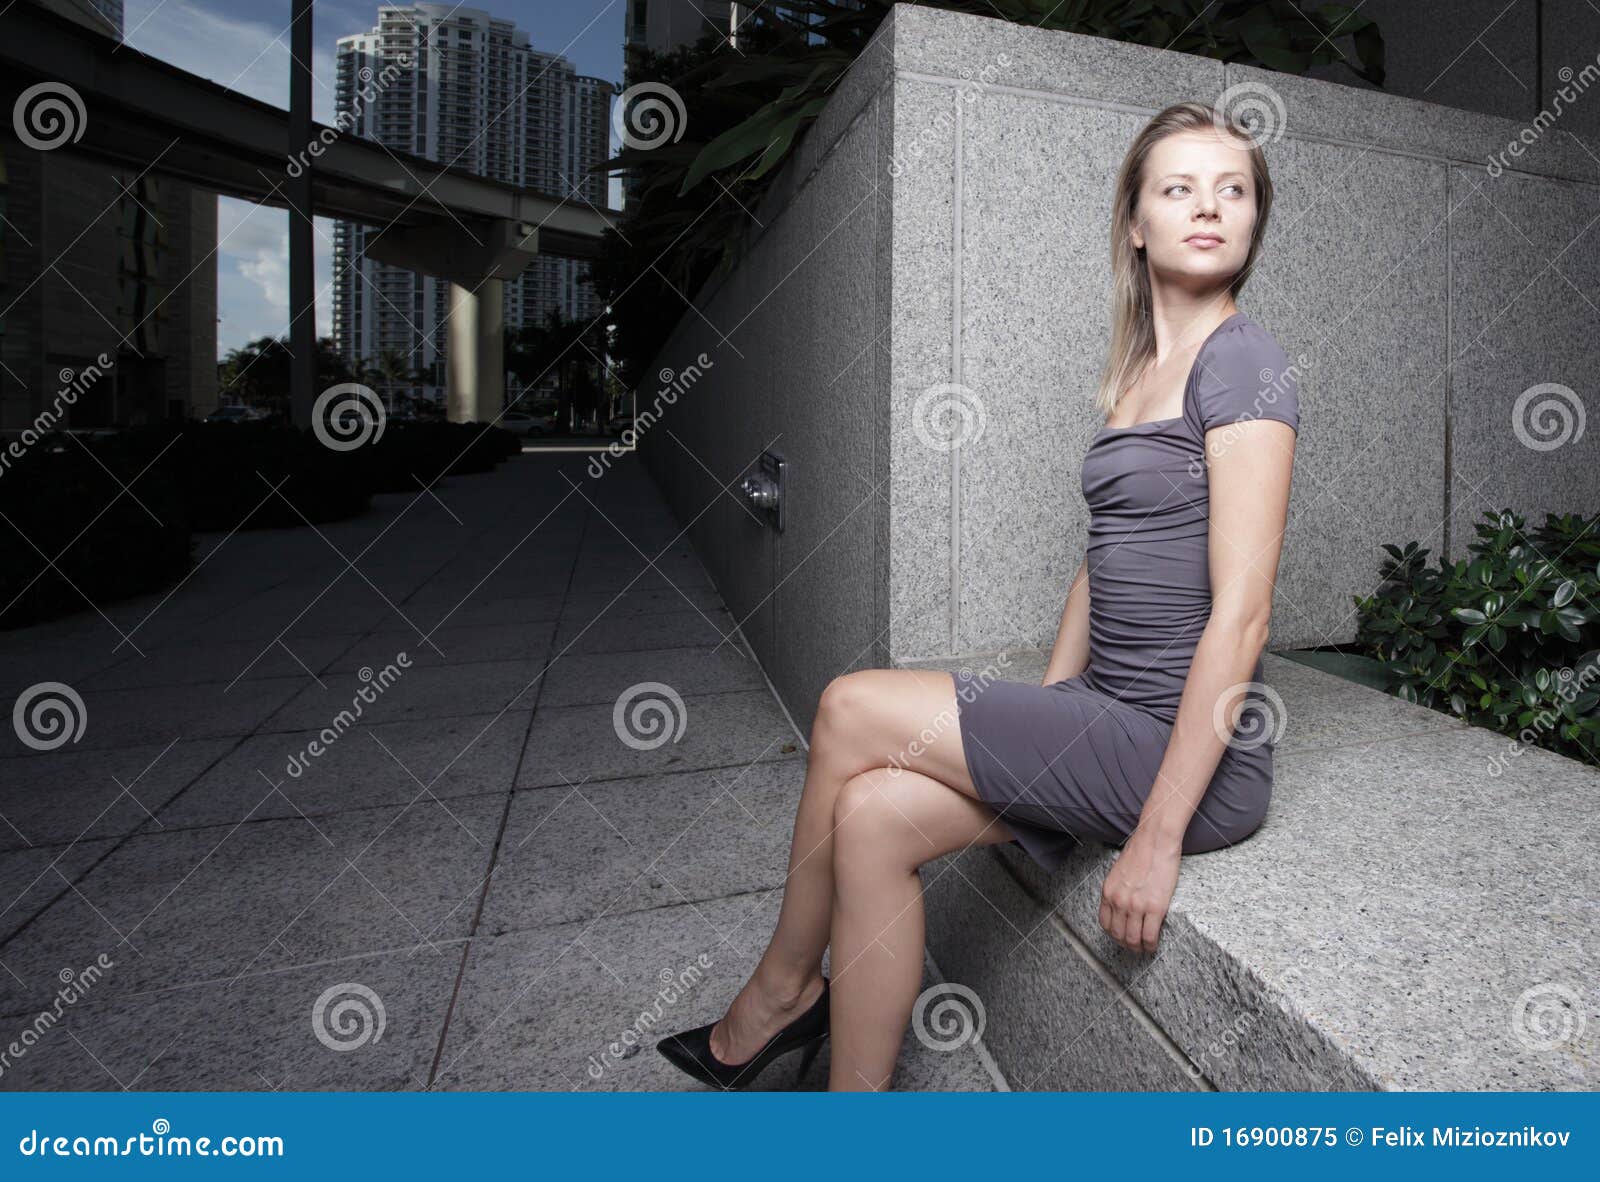 Legs their crossed woman with sitting Hypermobility: What